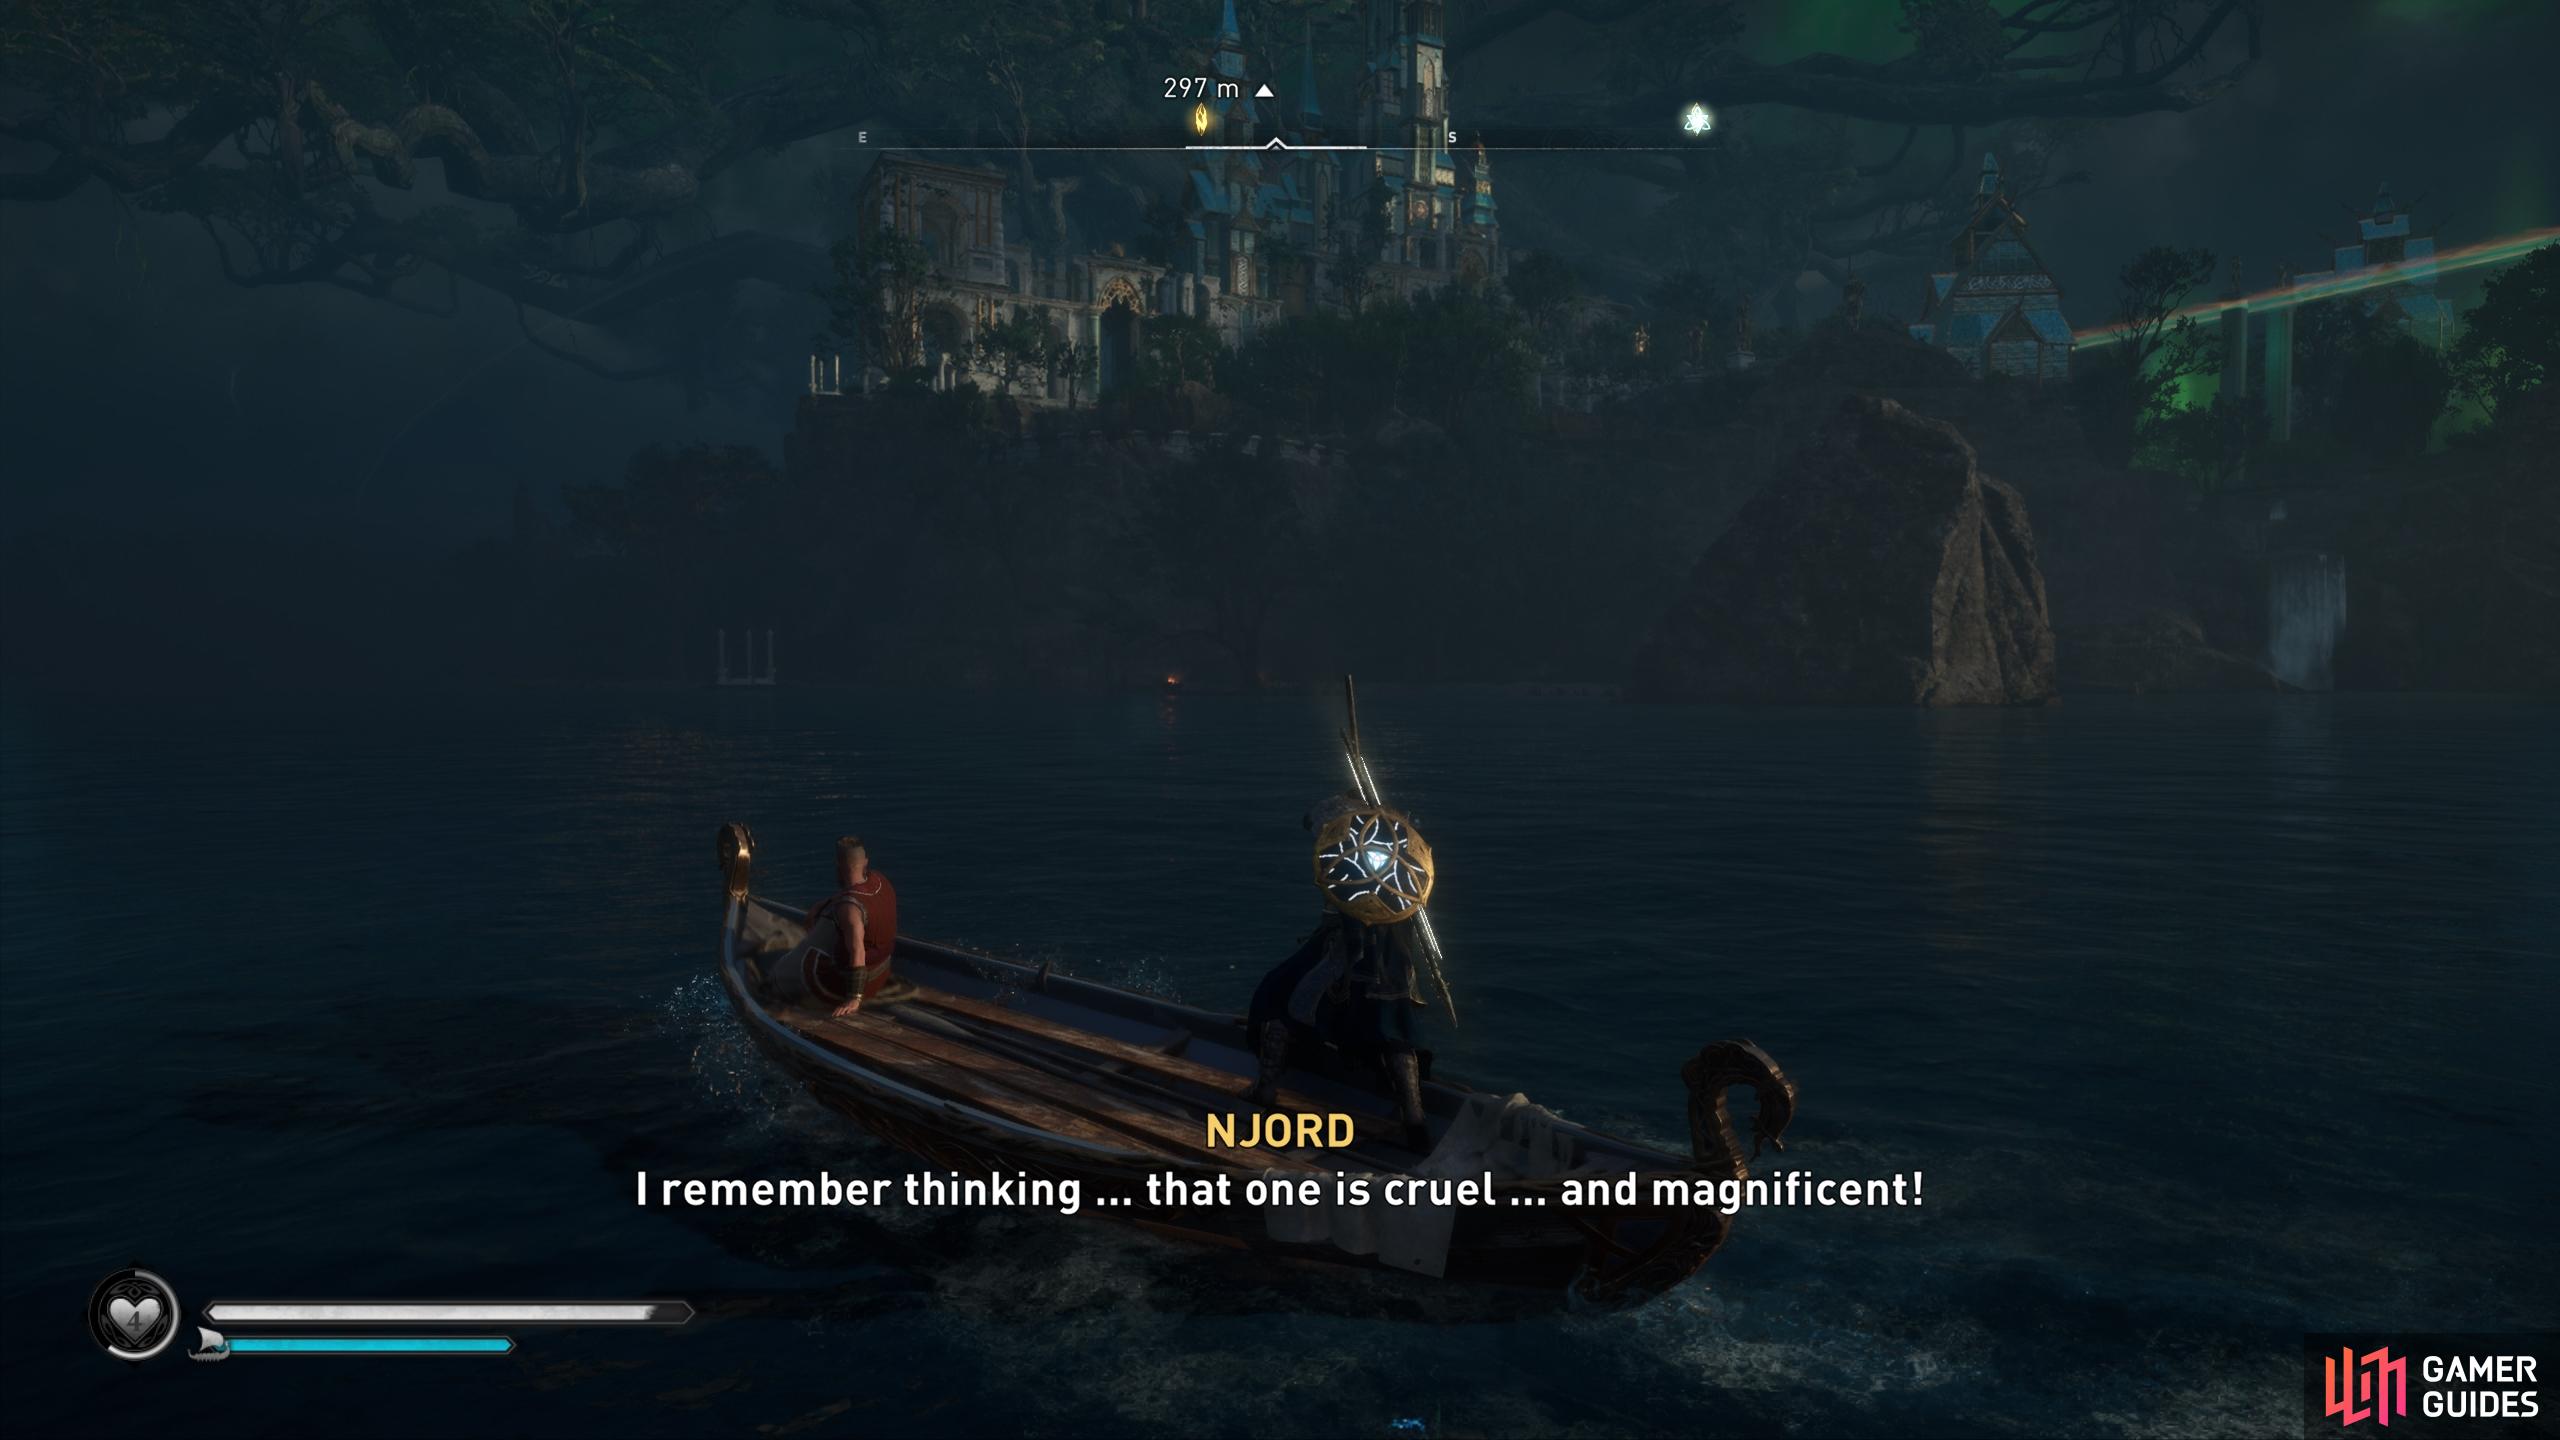 Wait for Njord to get in the boat with you, then ferry him back to the shore to the south.